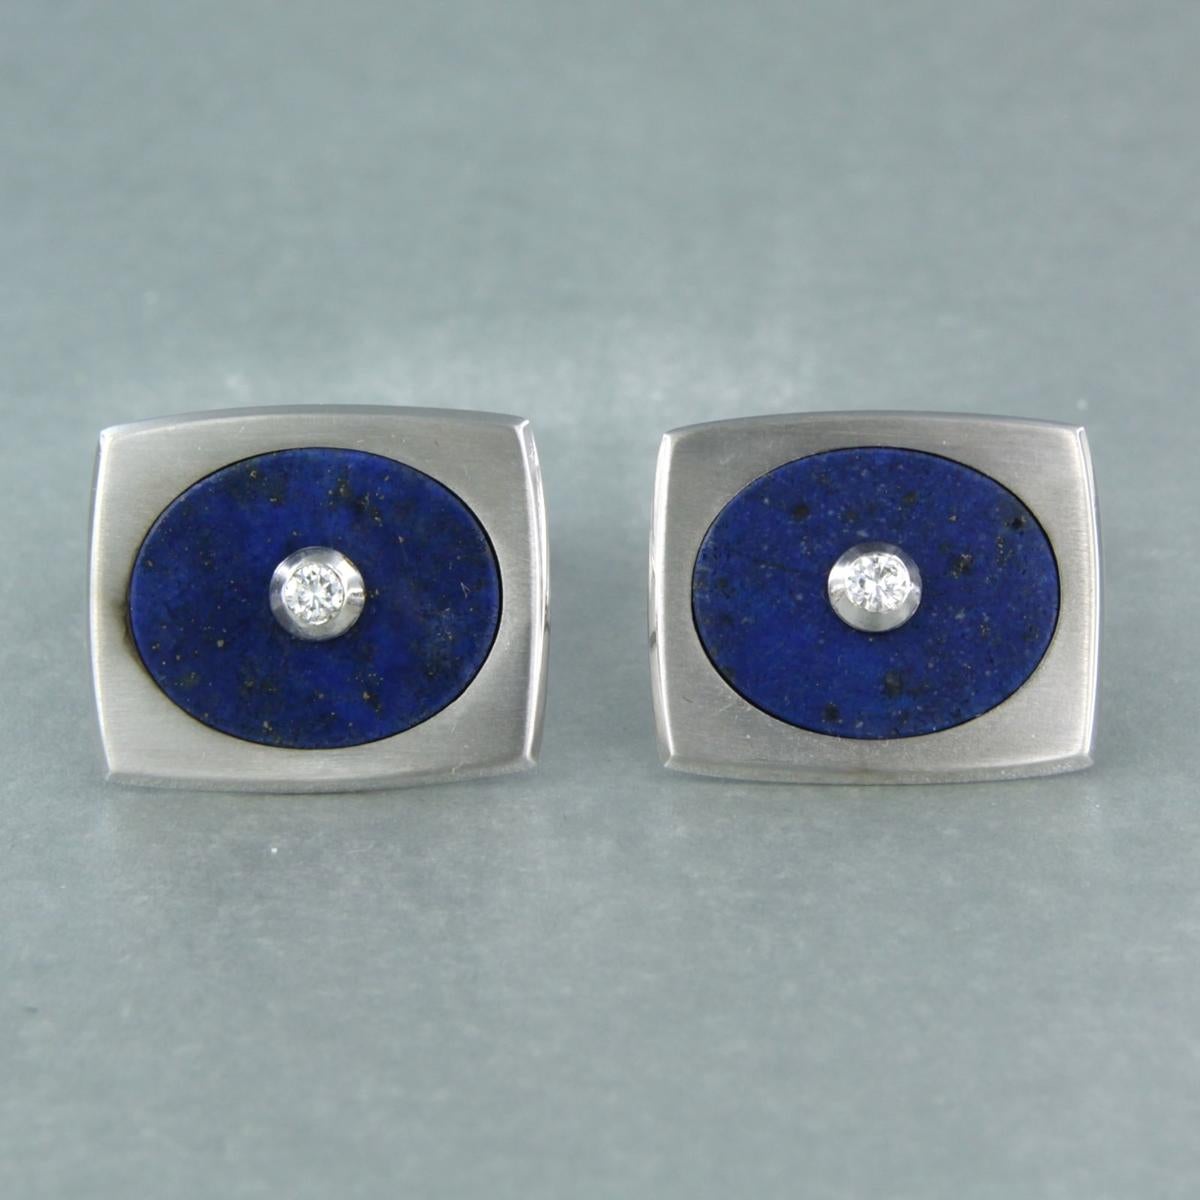 14 kt white gold cufflinks set with lapis lazuli ​​and brilliant cut diamond 0.06 ct F/G VS/SI - size 1.9 cm x 1.6 cm

detailed description

The cufflinks are 1.9 cm wide and 1.6 cm high

weight 11.7 grams

Set with

- 2 x 1.5 cm x 1.2 cm oval flat